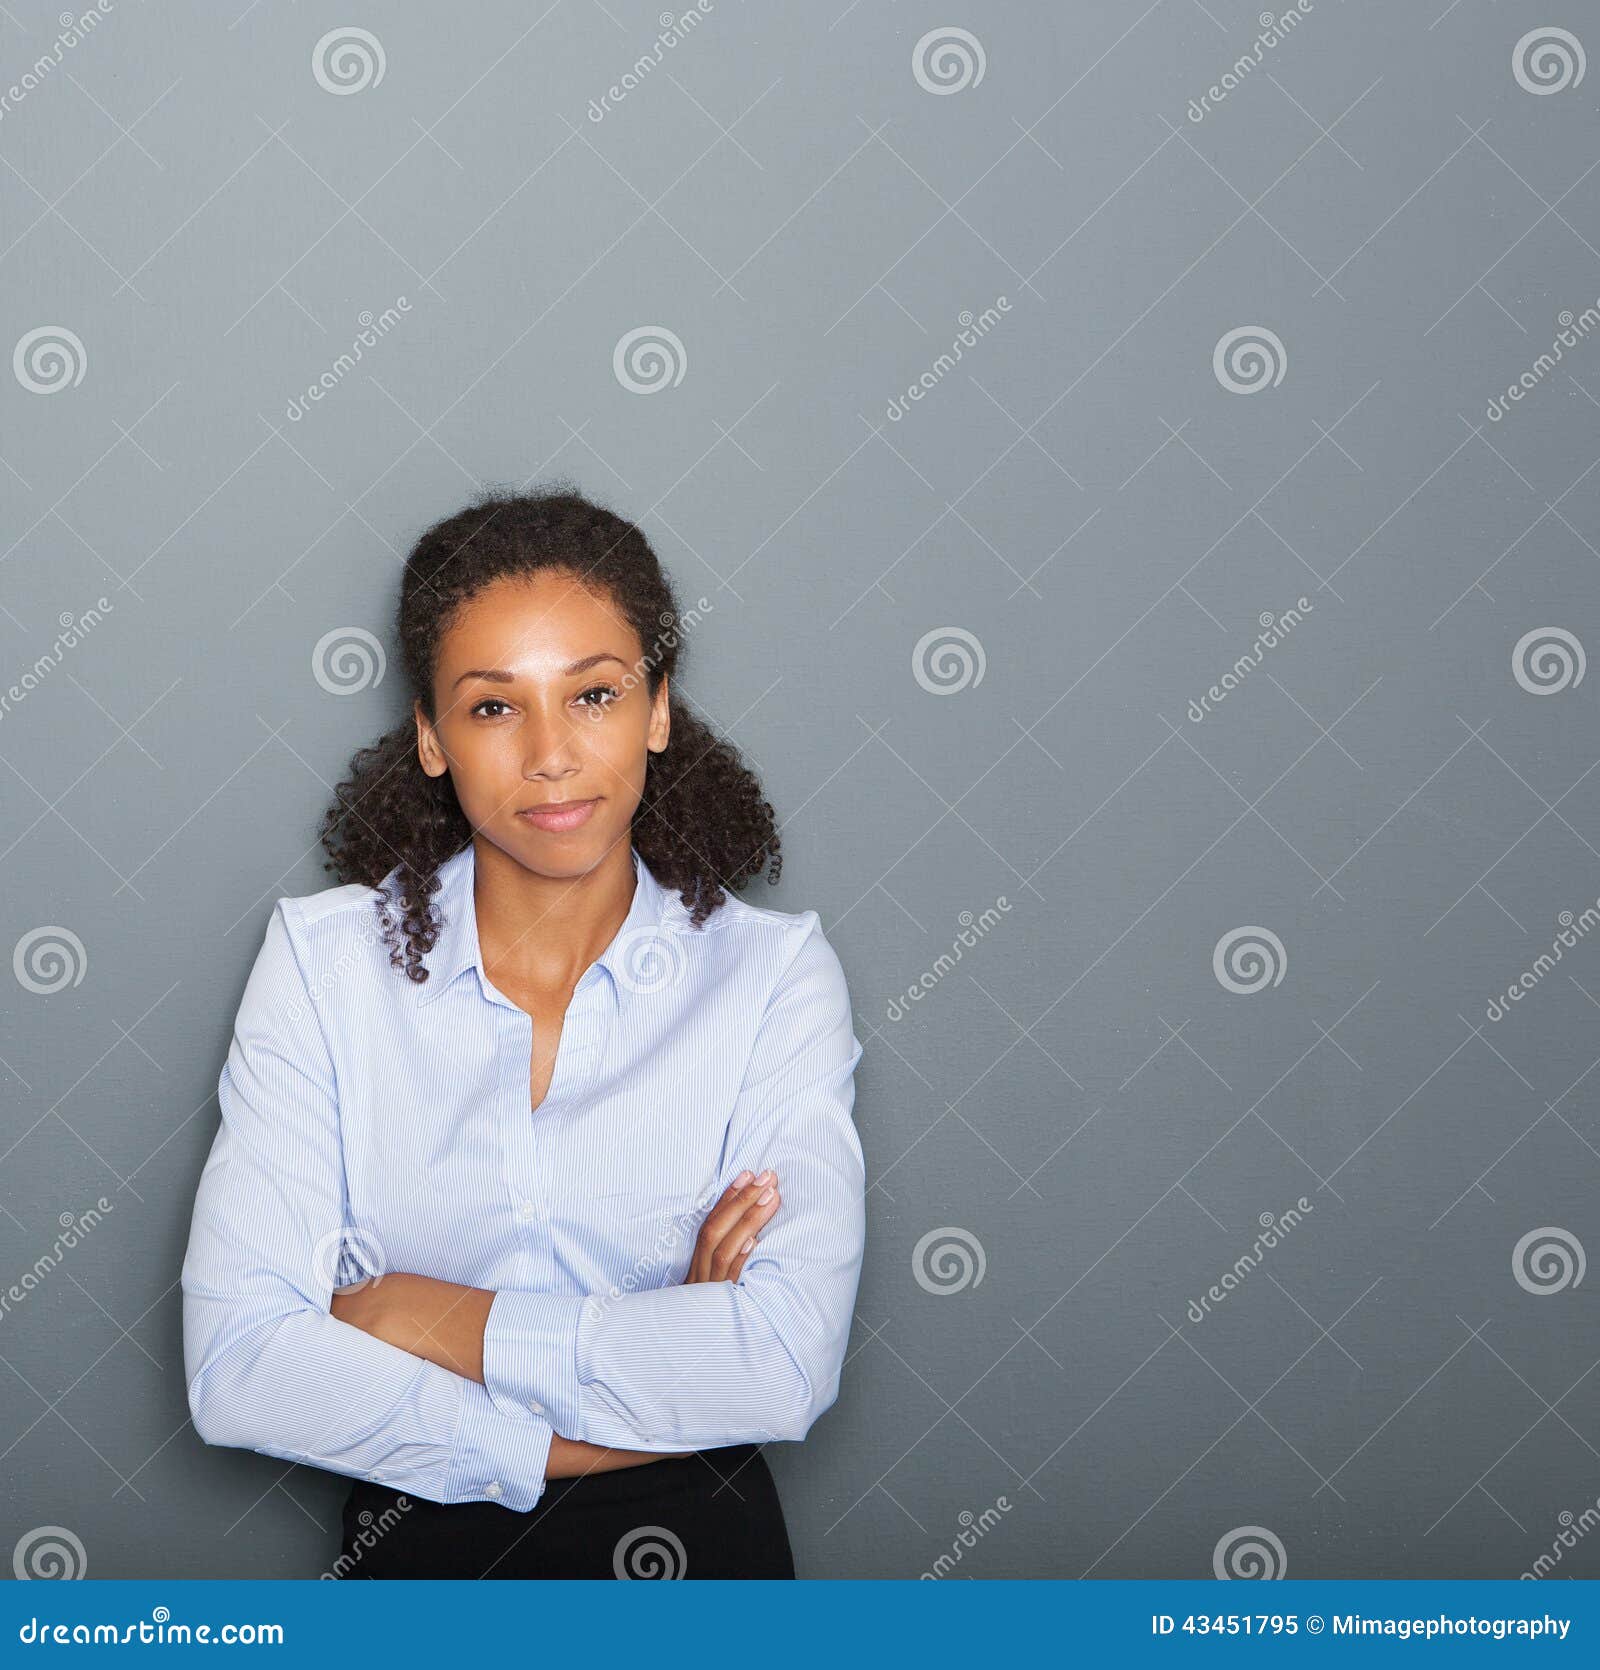 female business person with arms crossed